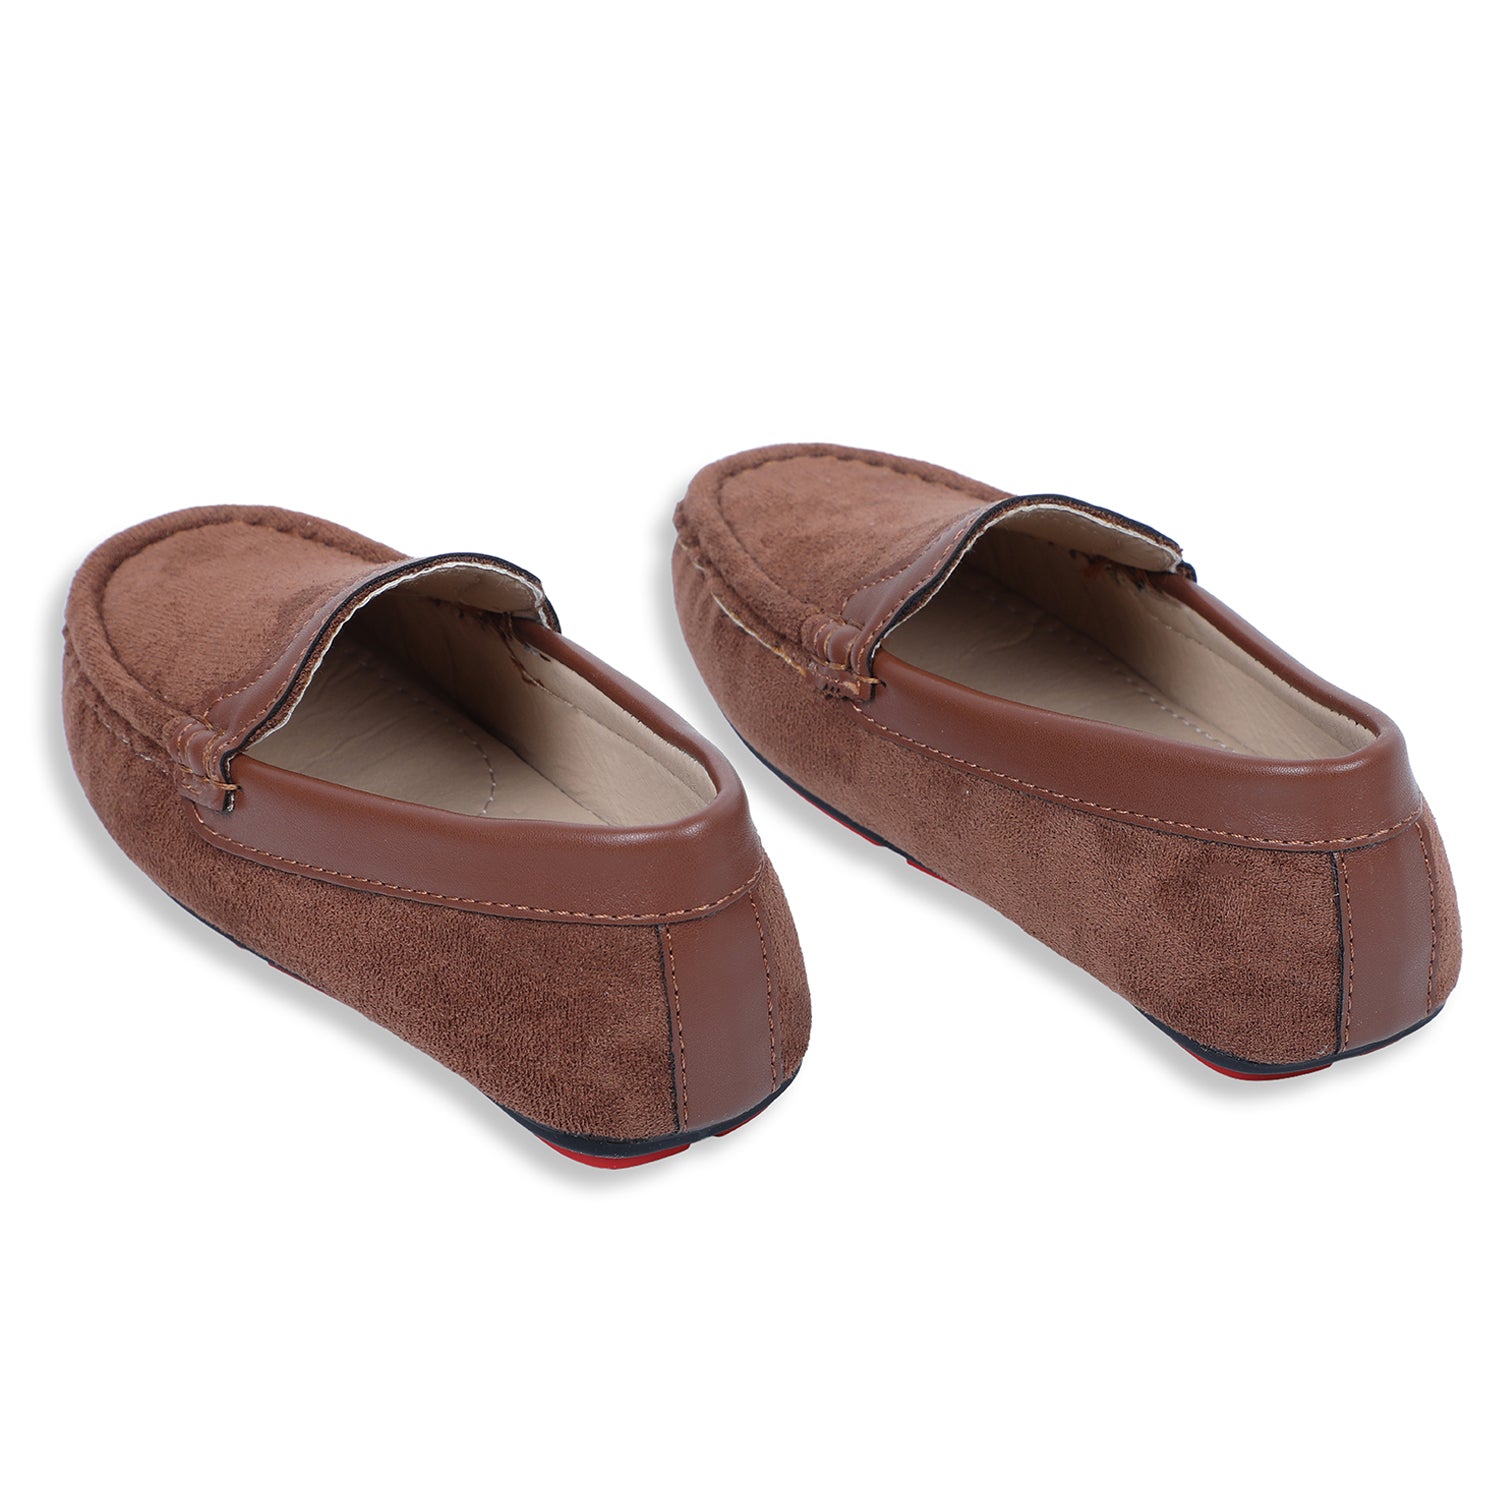 Baby Moo x Bash Kids Suede Loafer Shoes - Tan